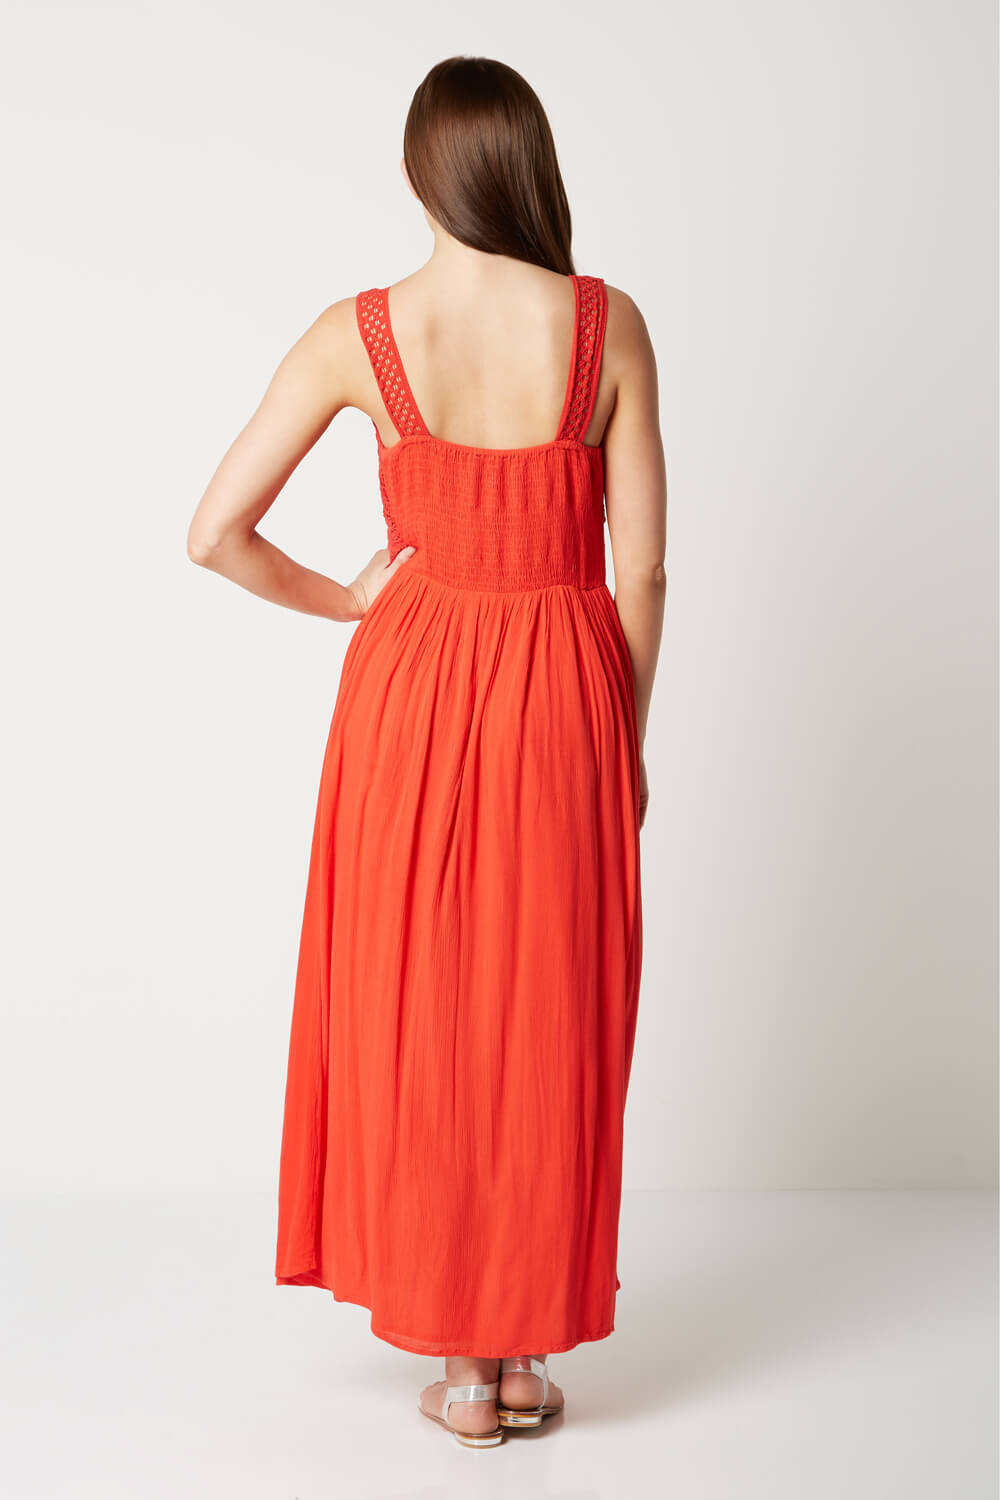 Red Cotton Embroidered Maxi Dress, Image 2 of 3